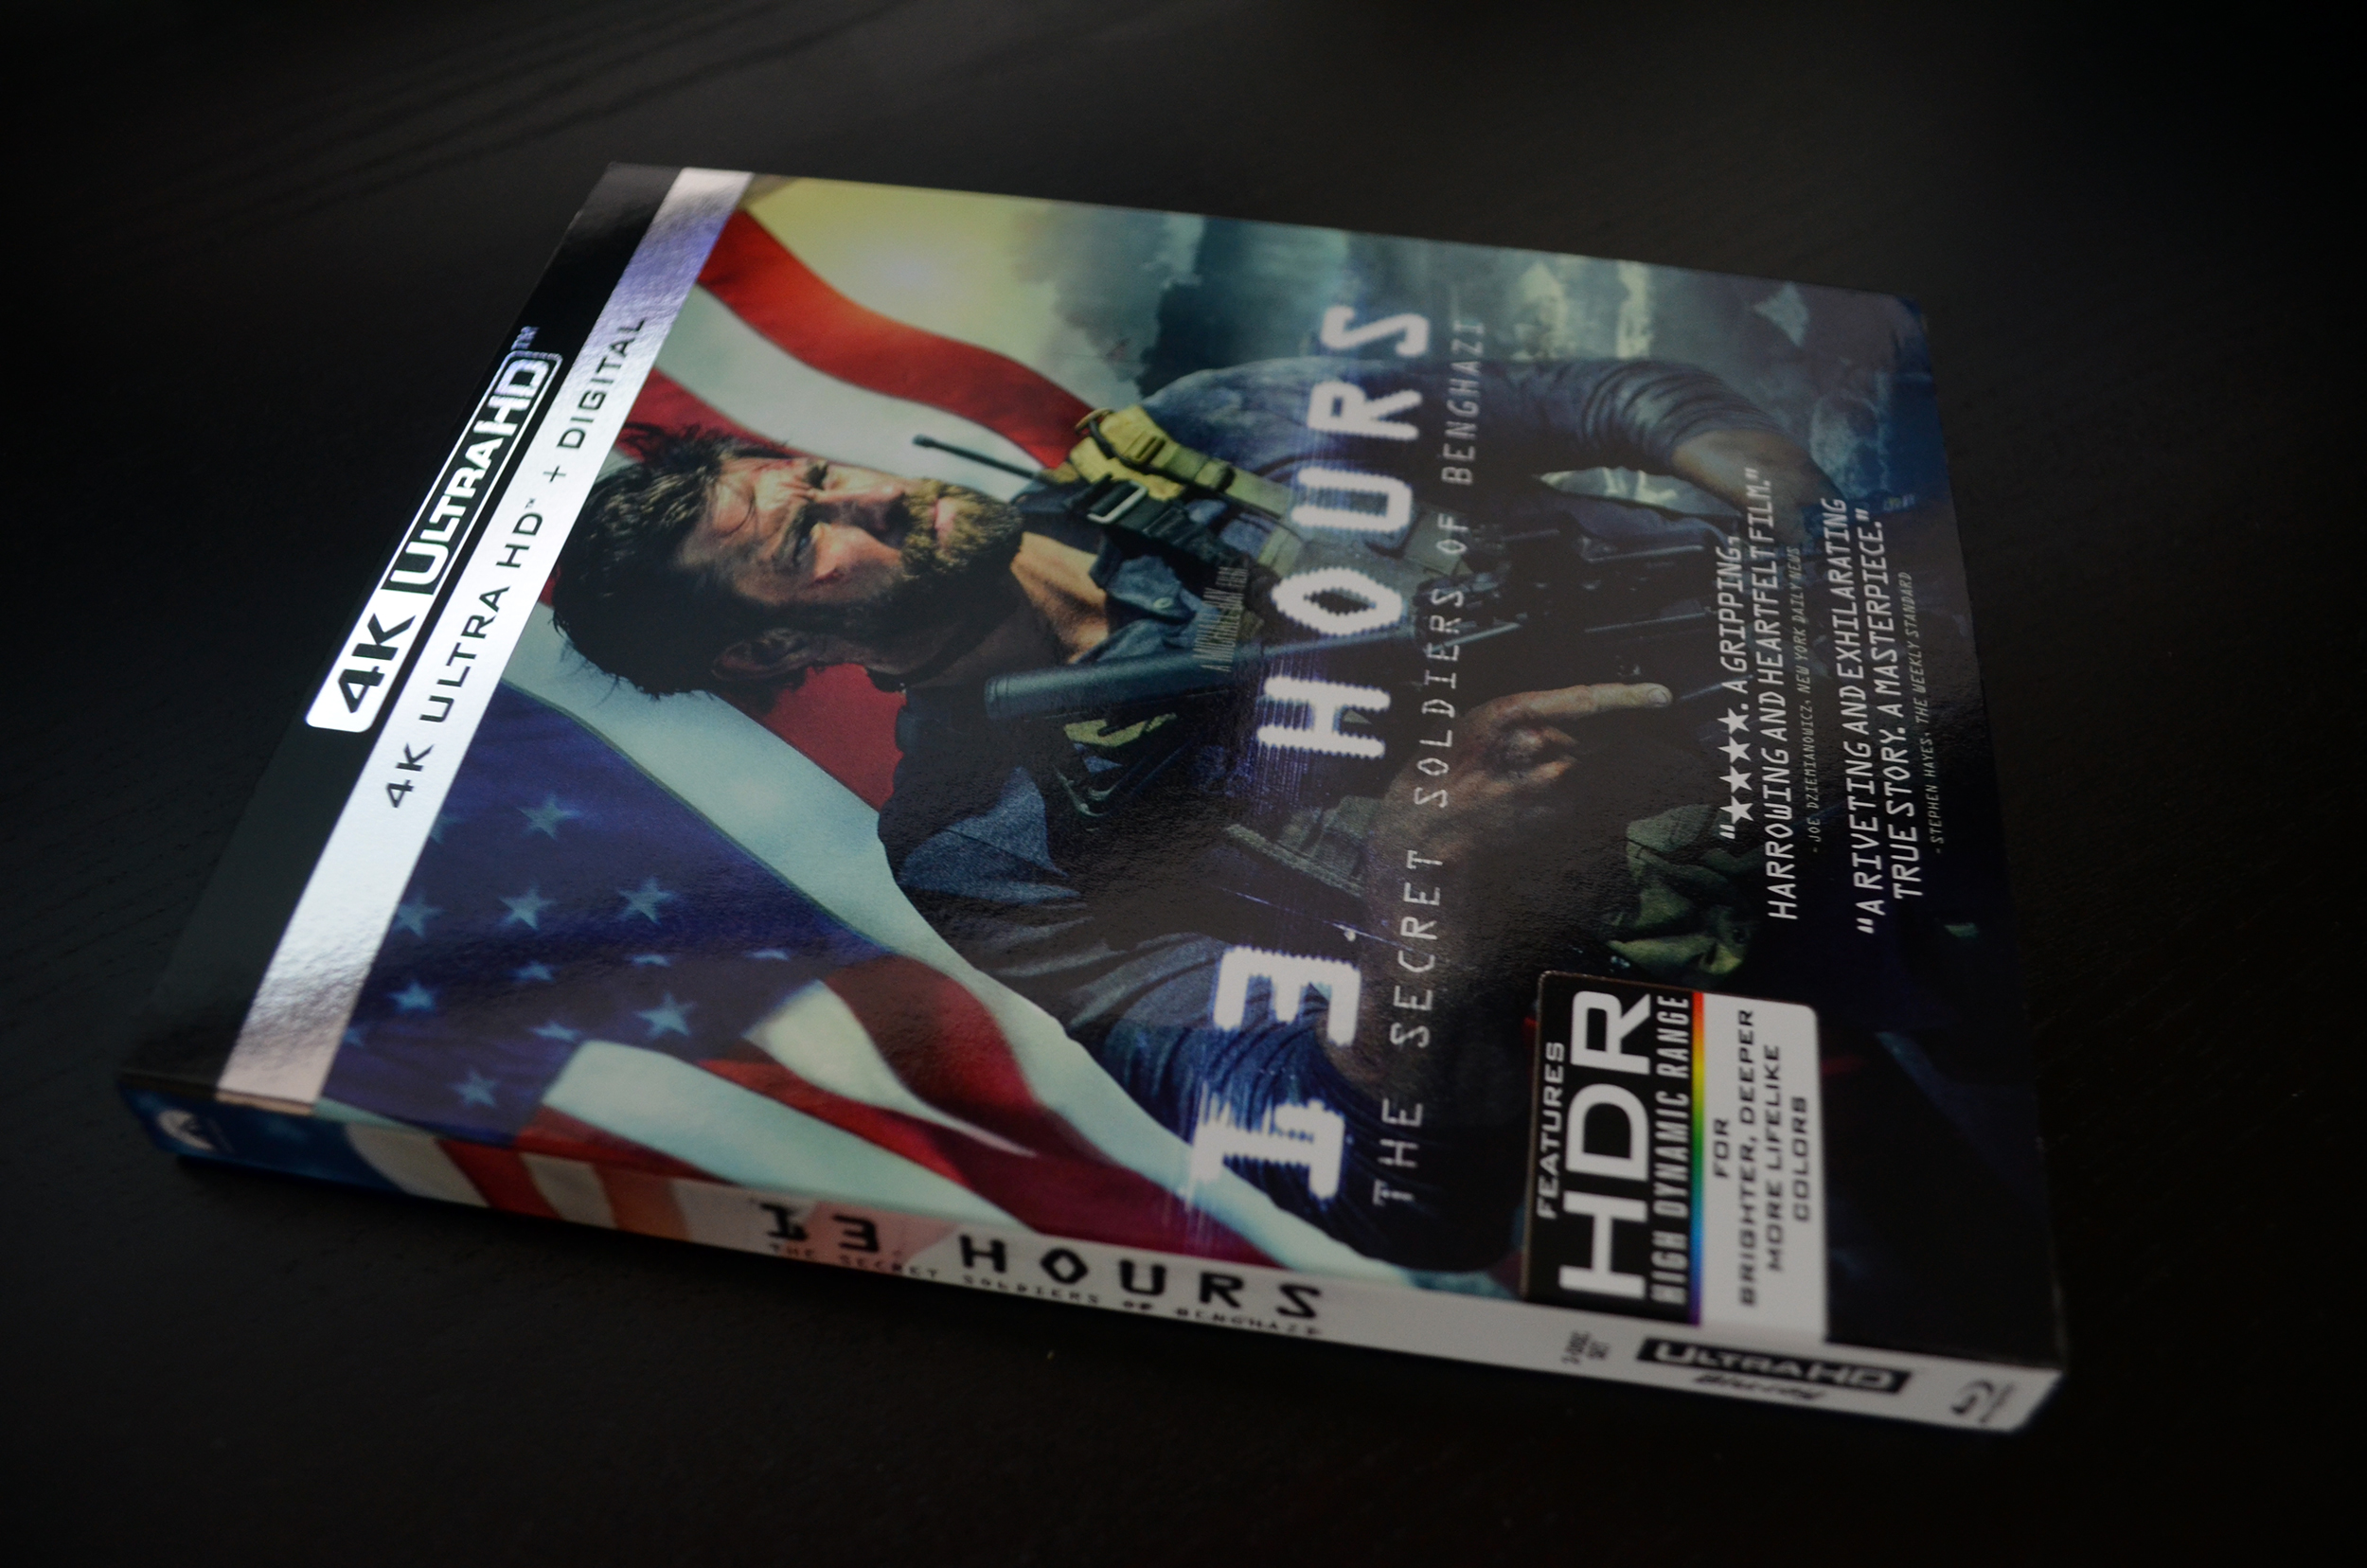 13 Hours 4K Review